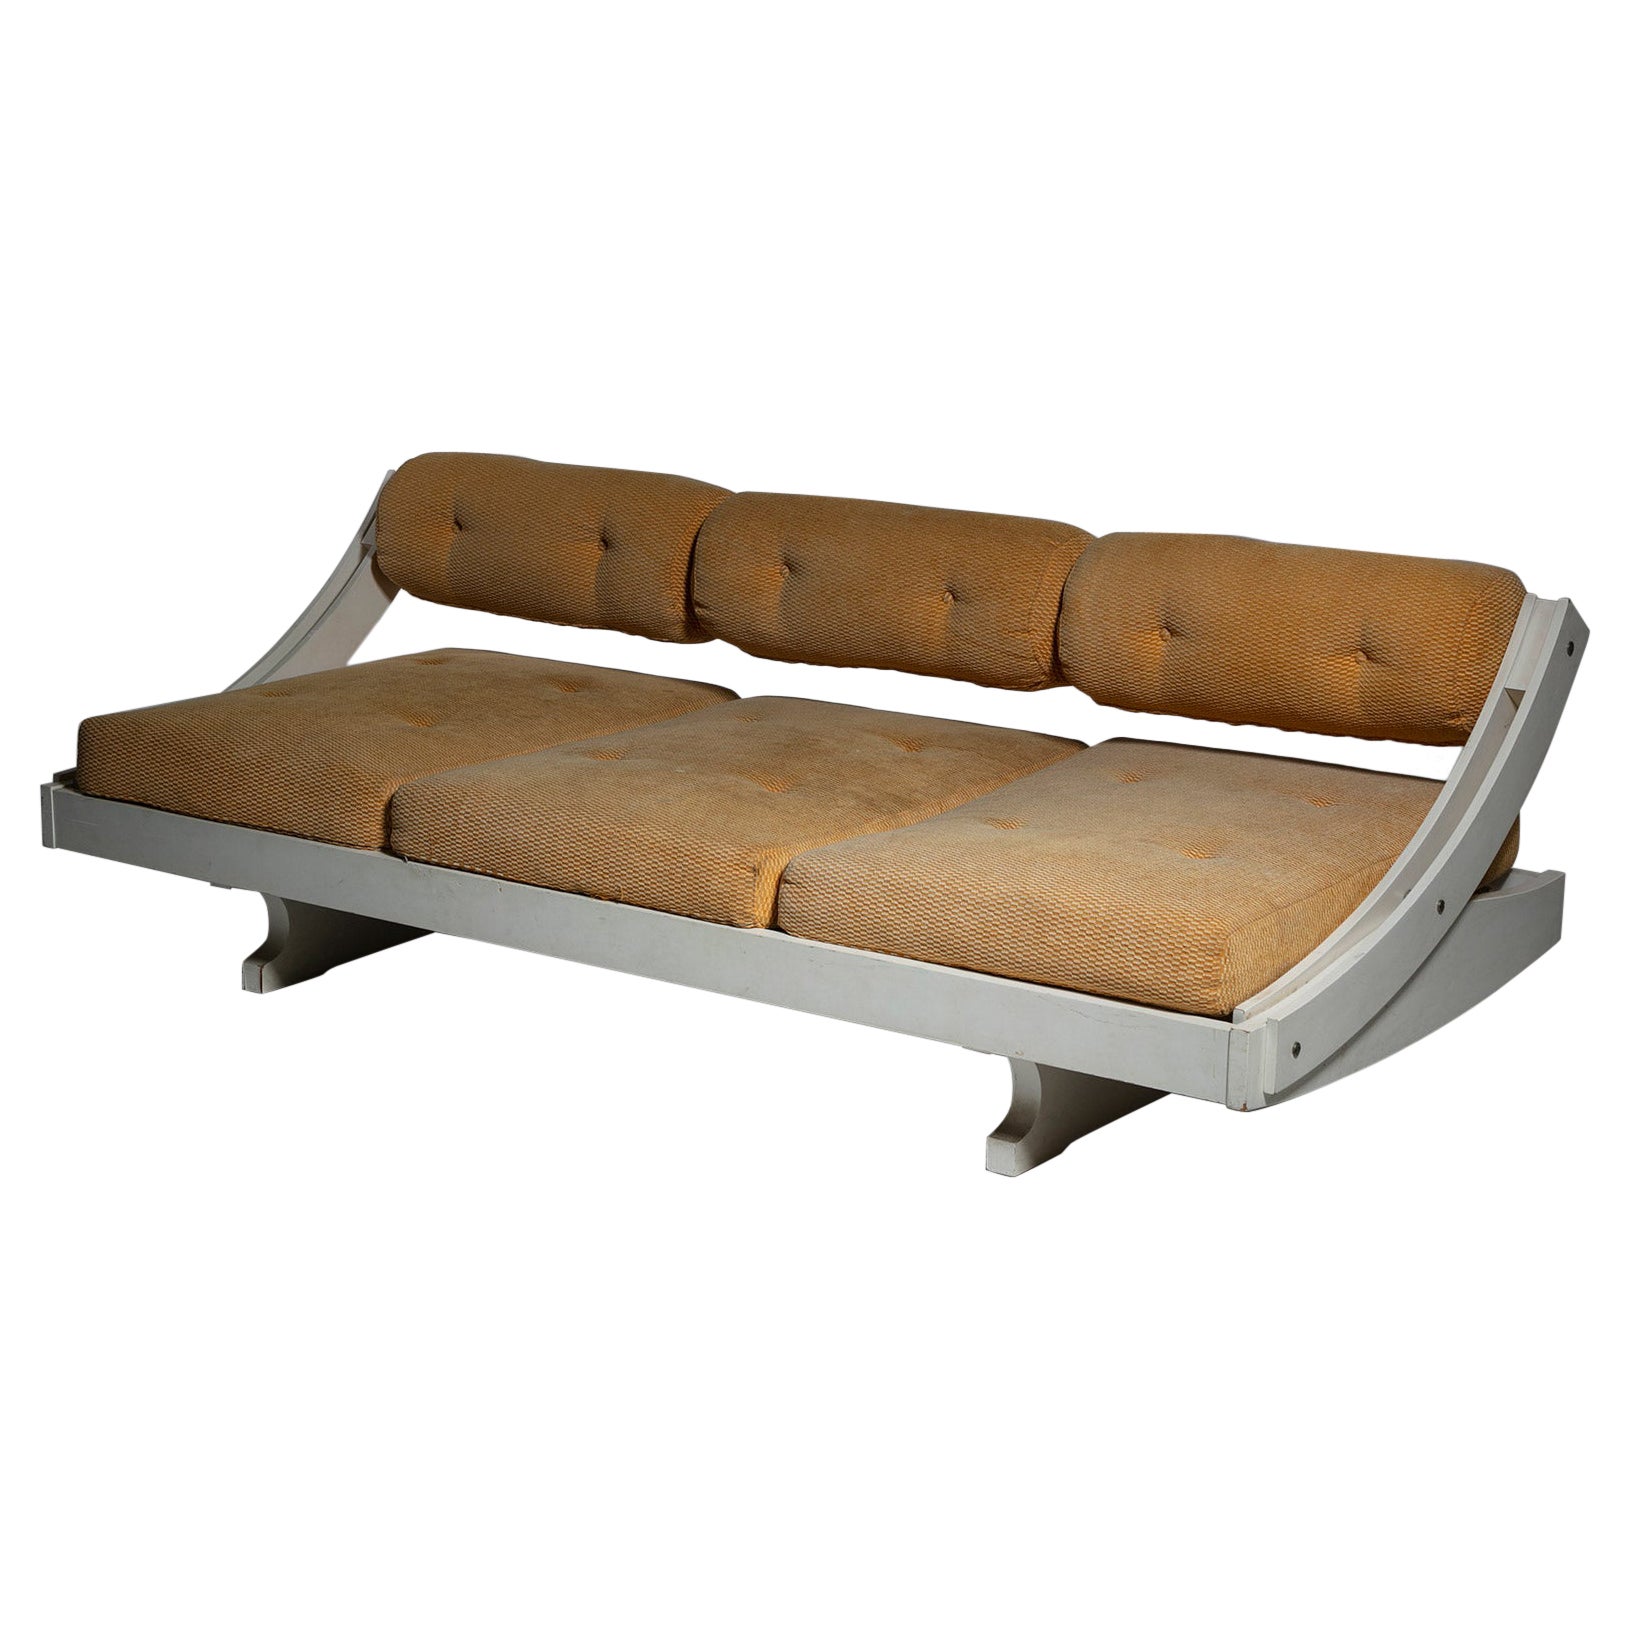 Adjustable White Wood Daybed By Gianni Songia for Sormani, Italy, 1960s